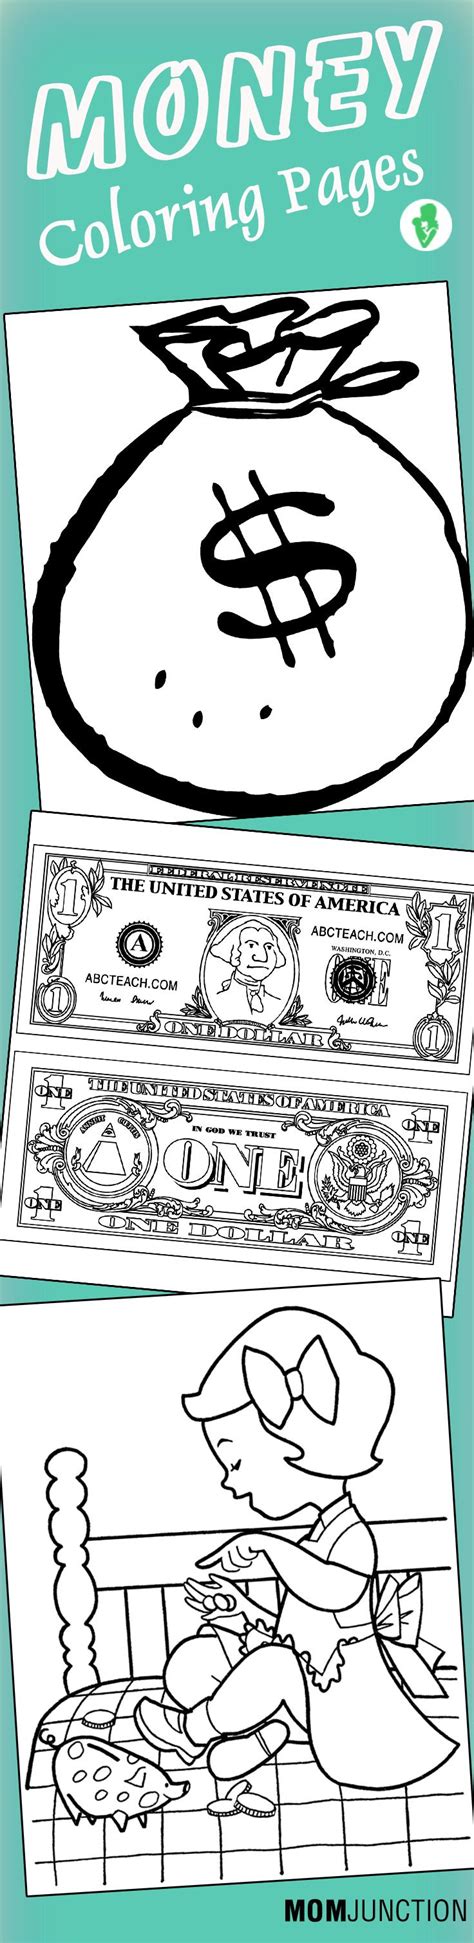 Money Coloring Pages Free Printables Momjunction 5 Dollar Bill Coloring Page - 5 Dollar Bill Coloring Page